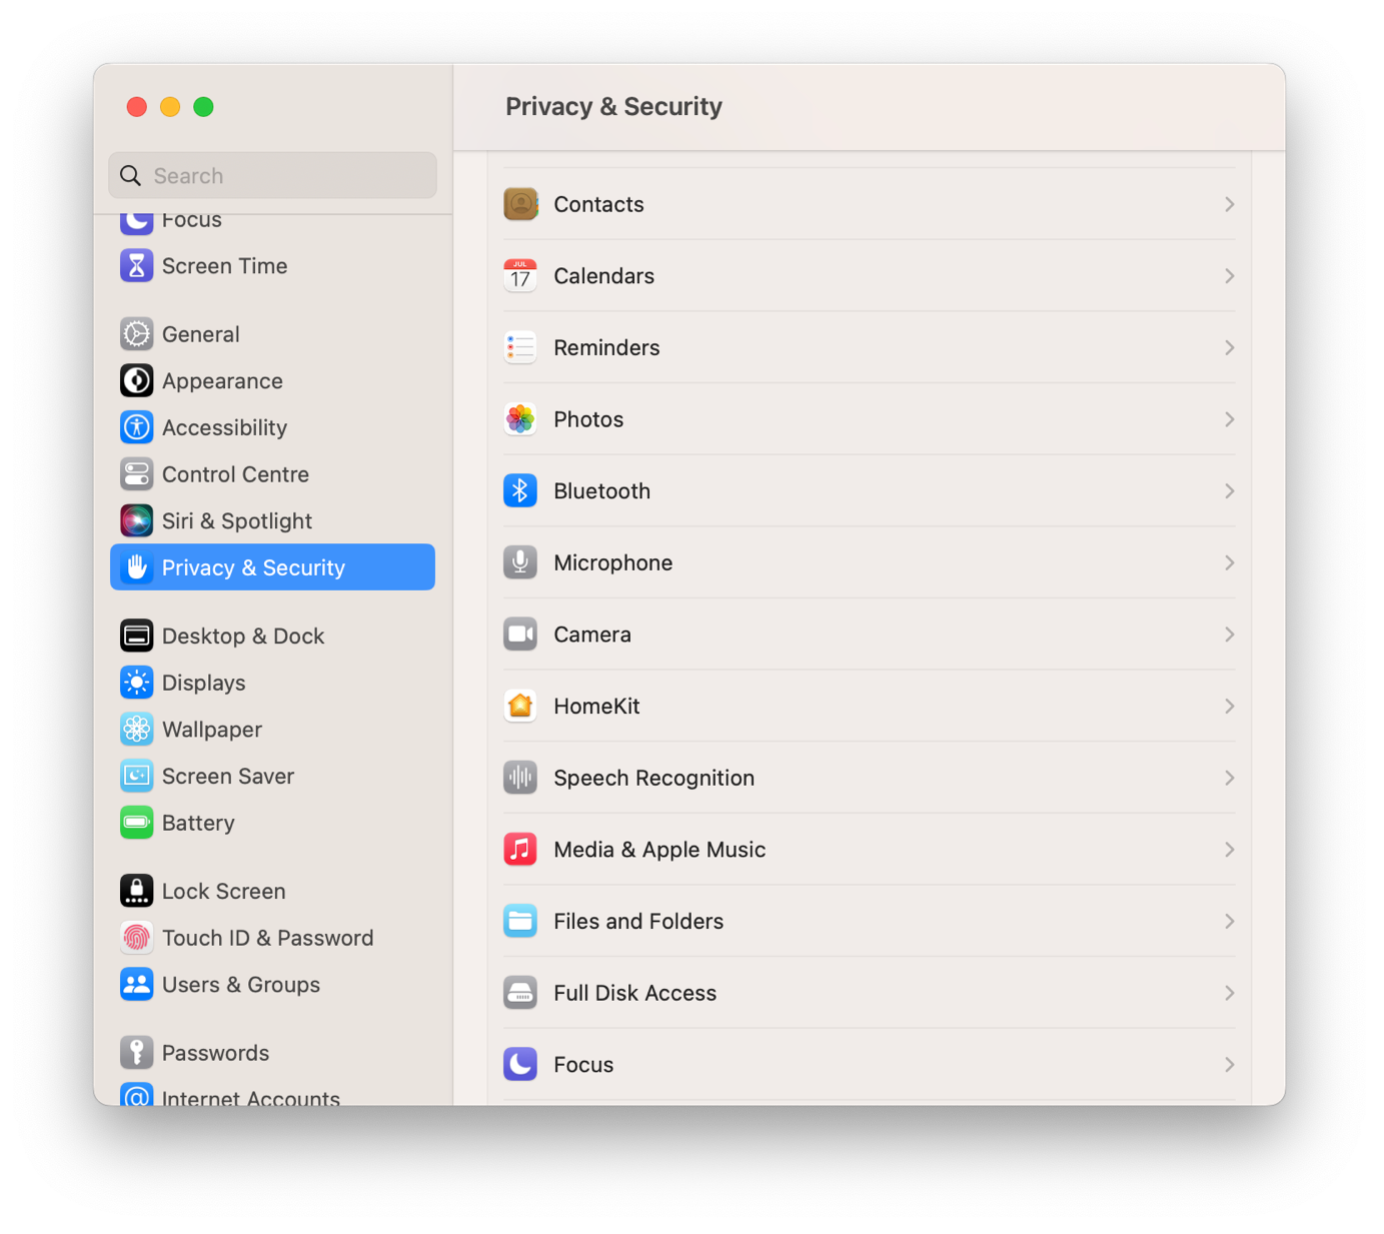 The Privacy and Security menu in macOS Ventura